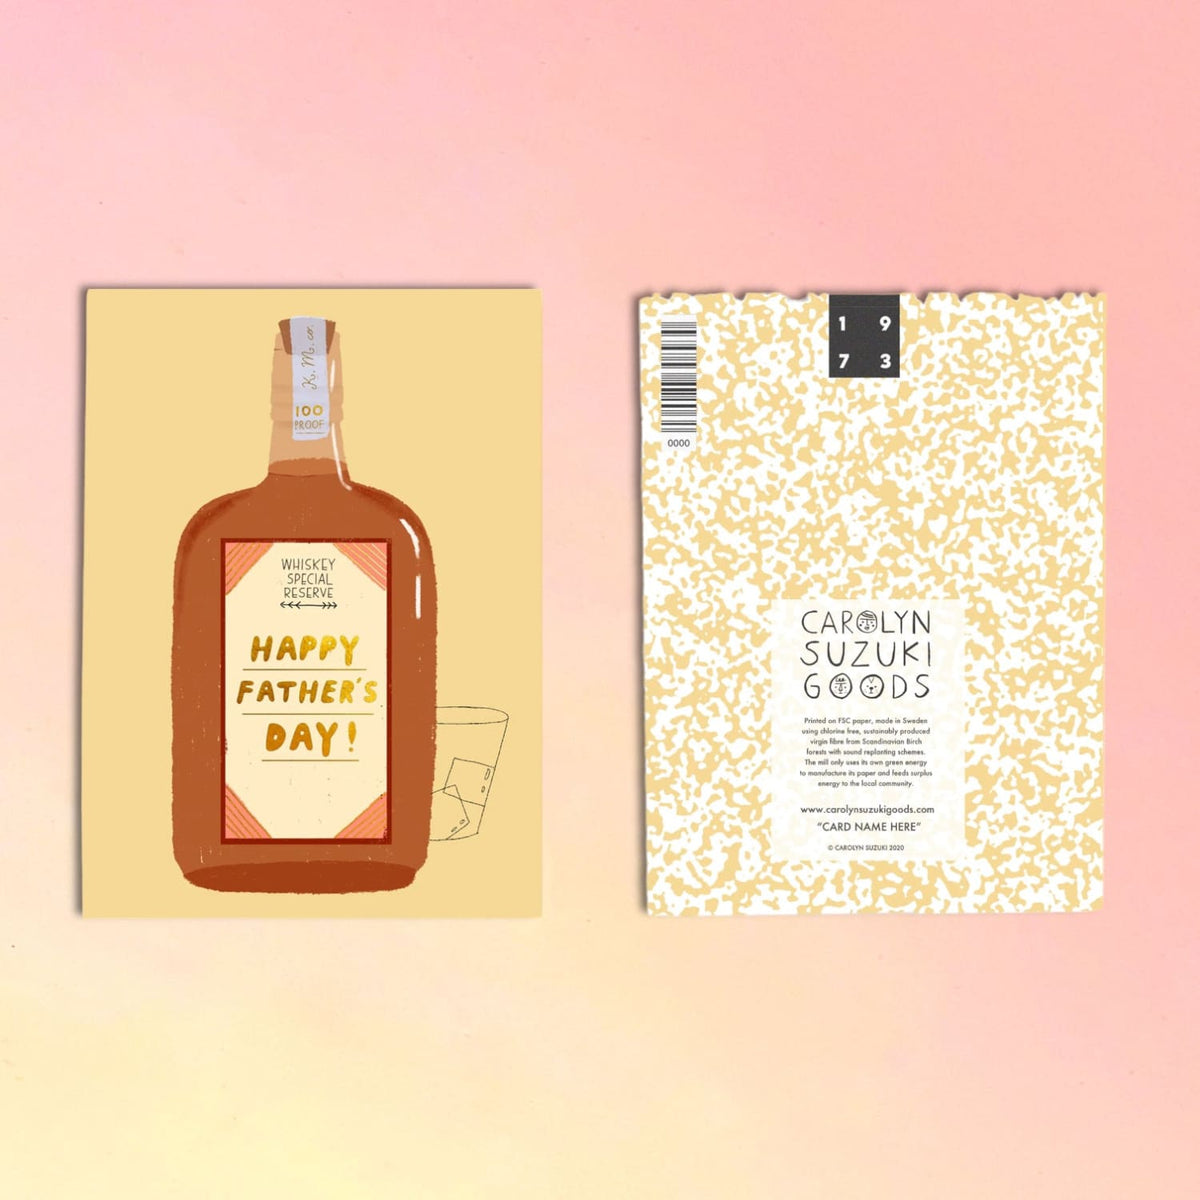 Special Reserve Whiskey Father’s Day Greeting Card Carolyn